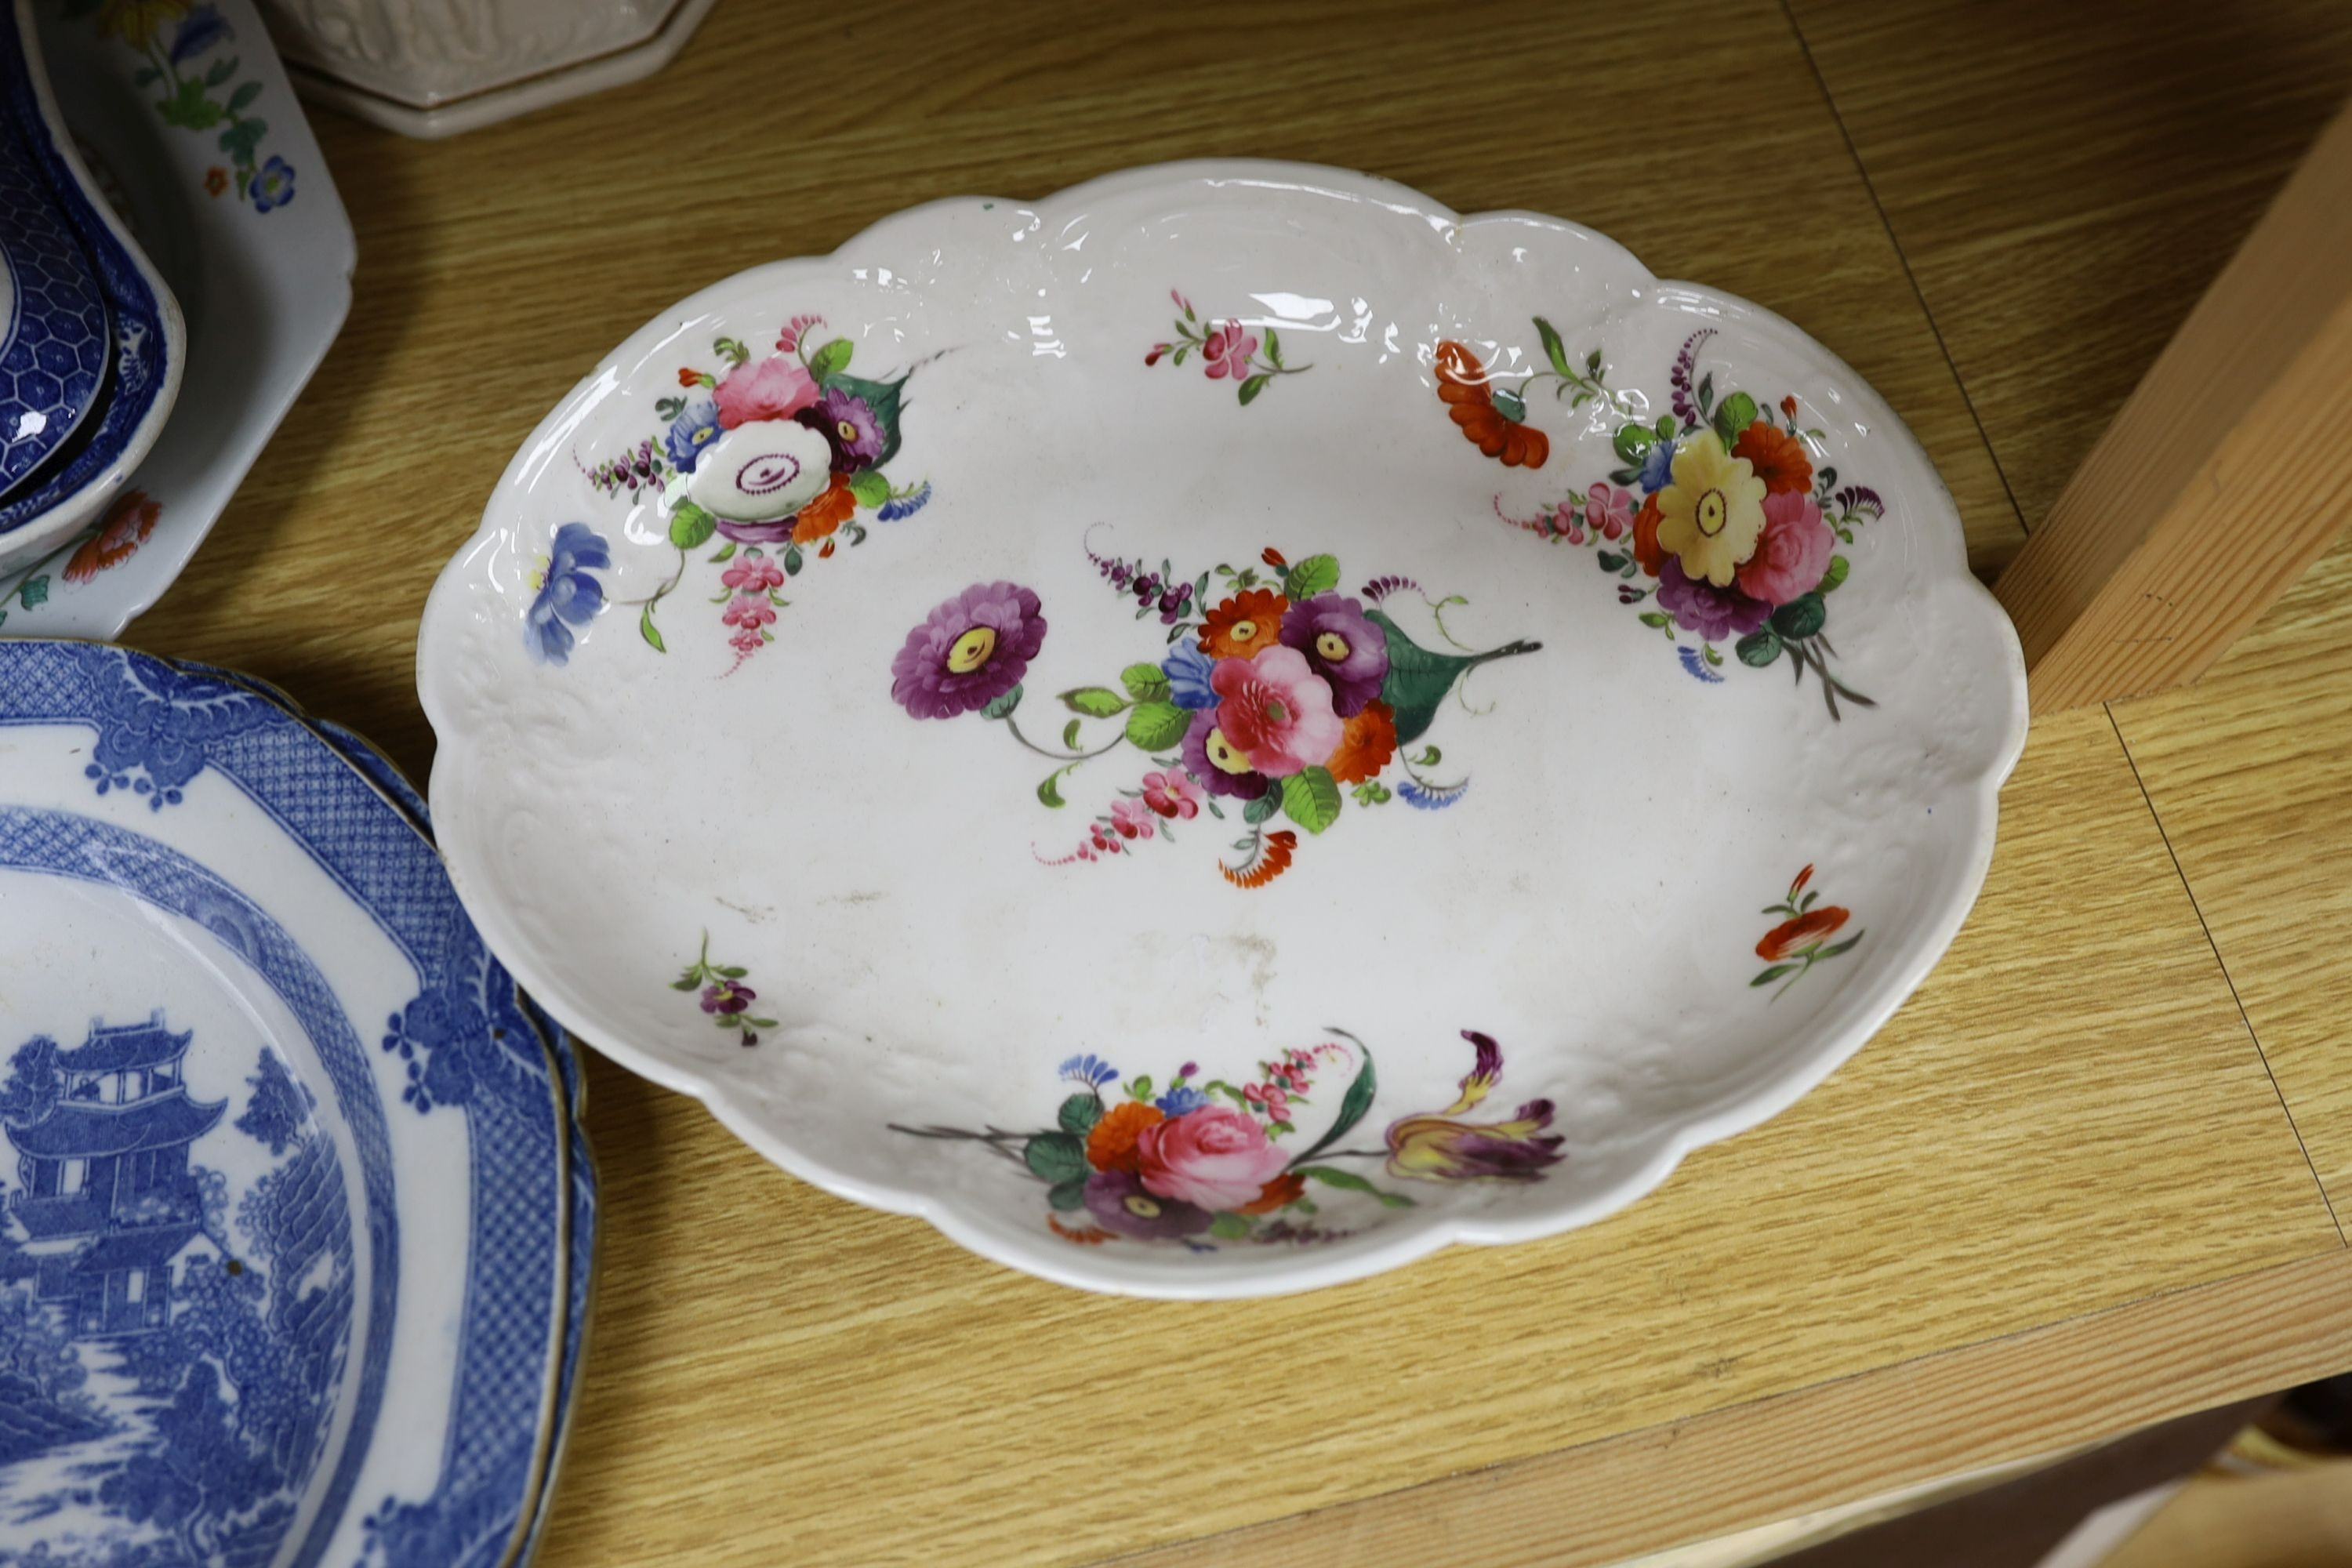 A pair of early 19th century pearlware plates, Leeds pottery tureen and cover, Coalport dessert dish. Spode serving plate and two mugs